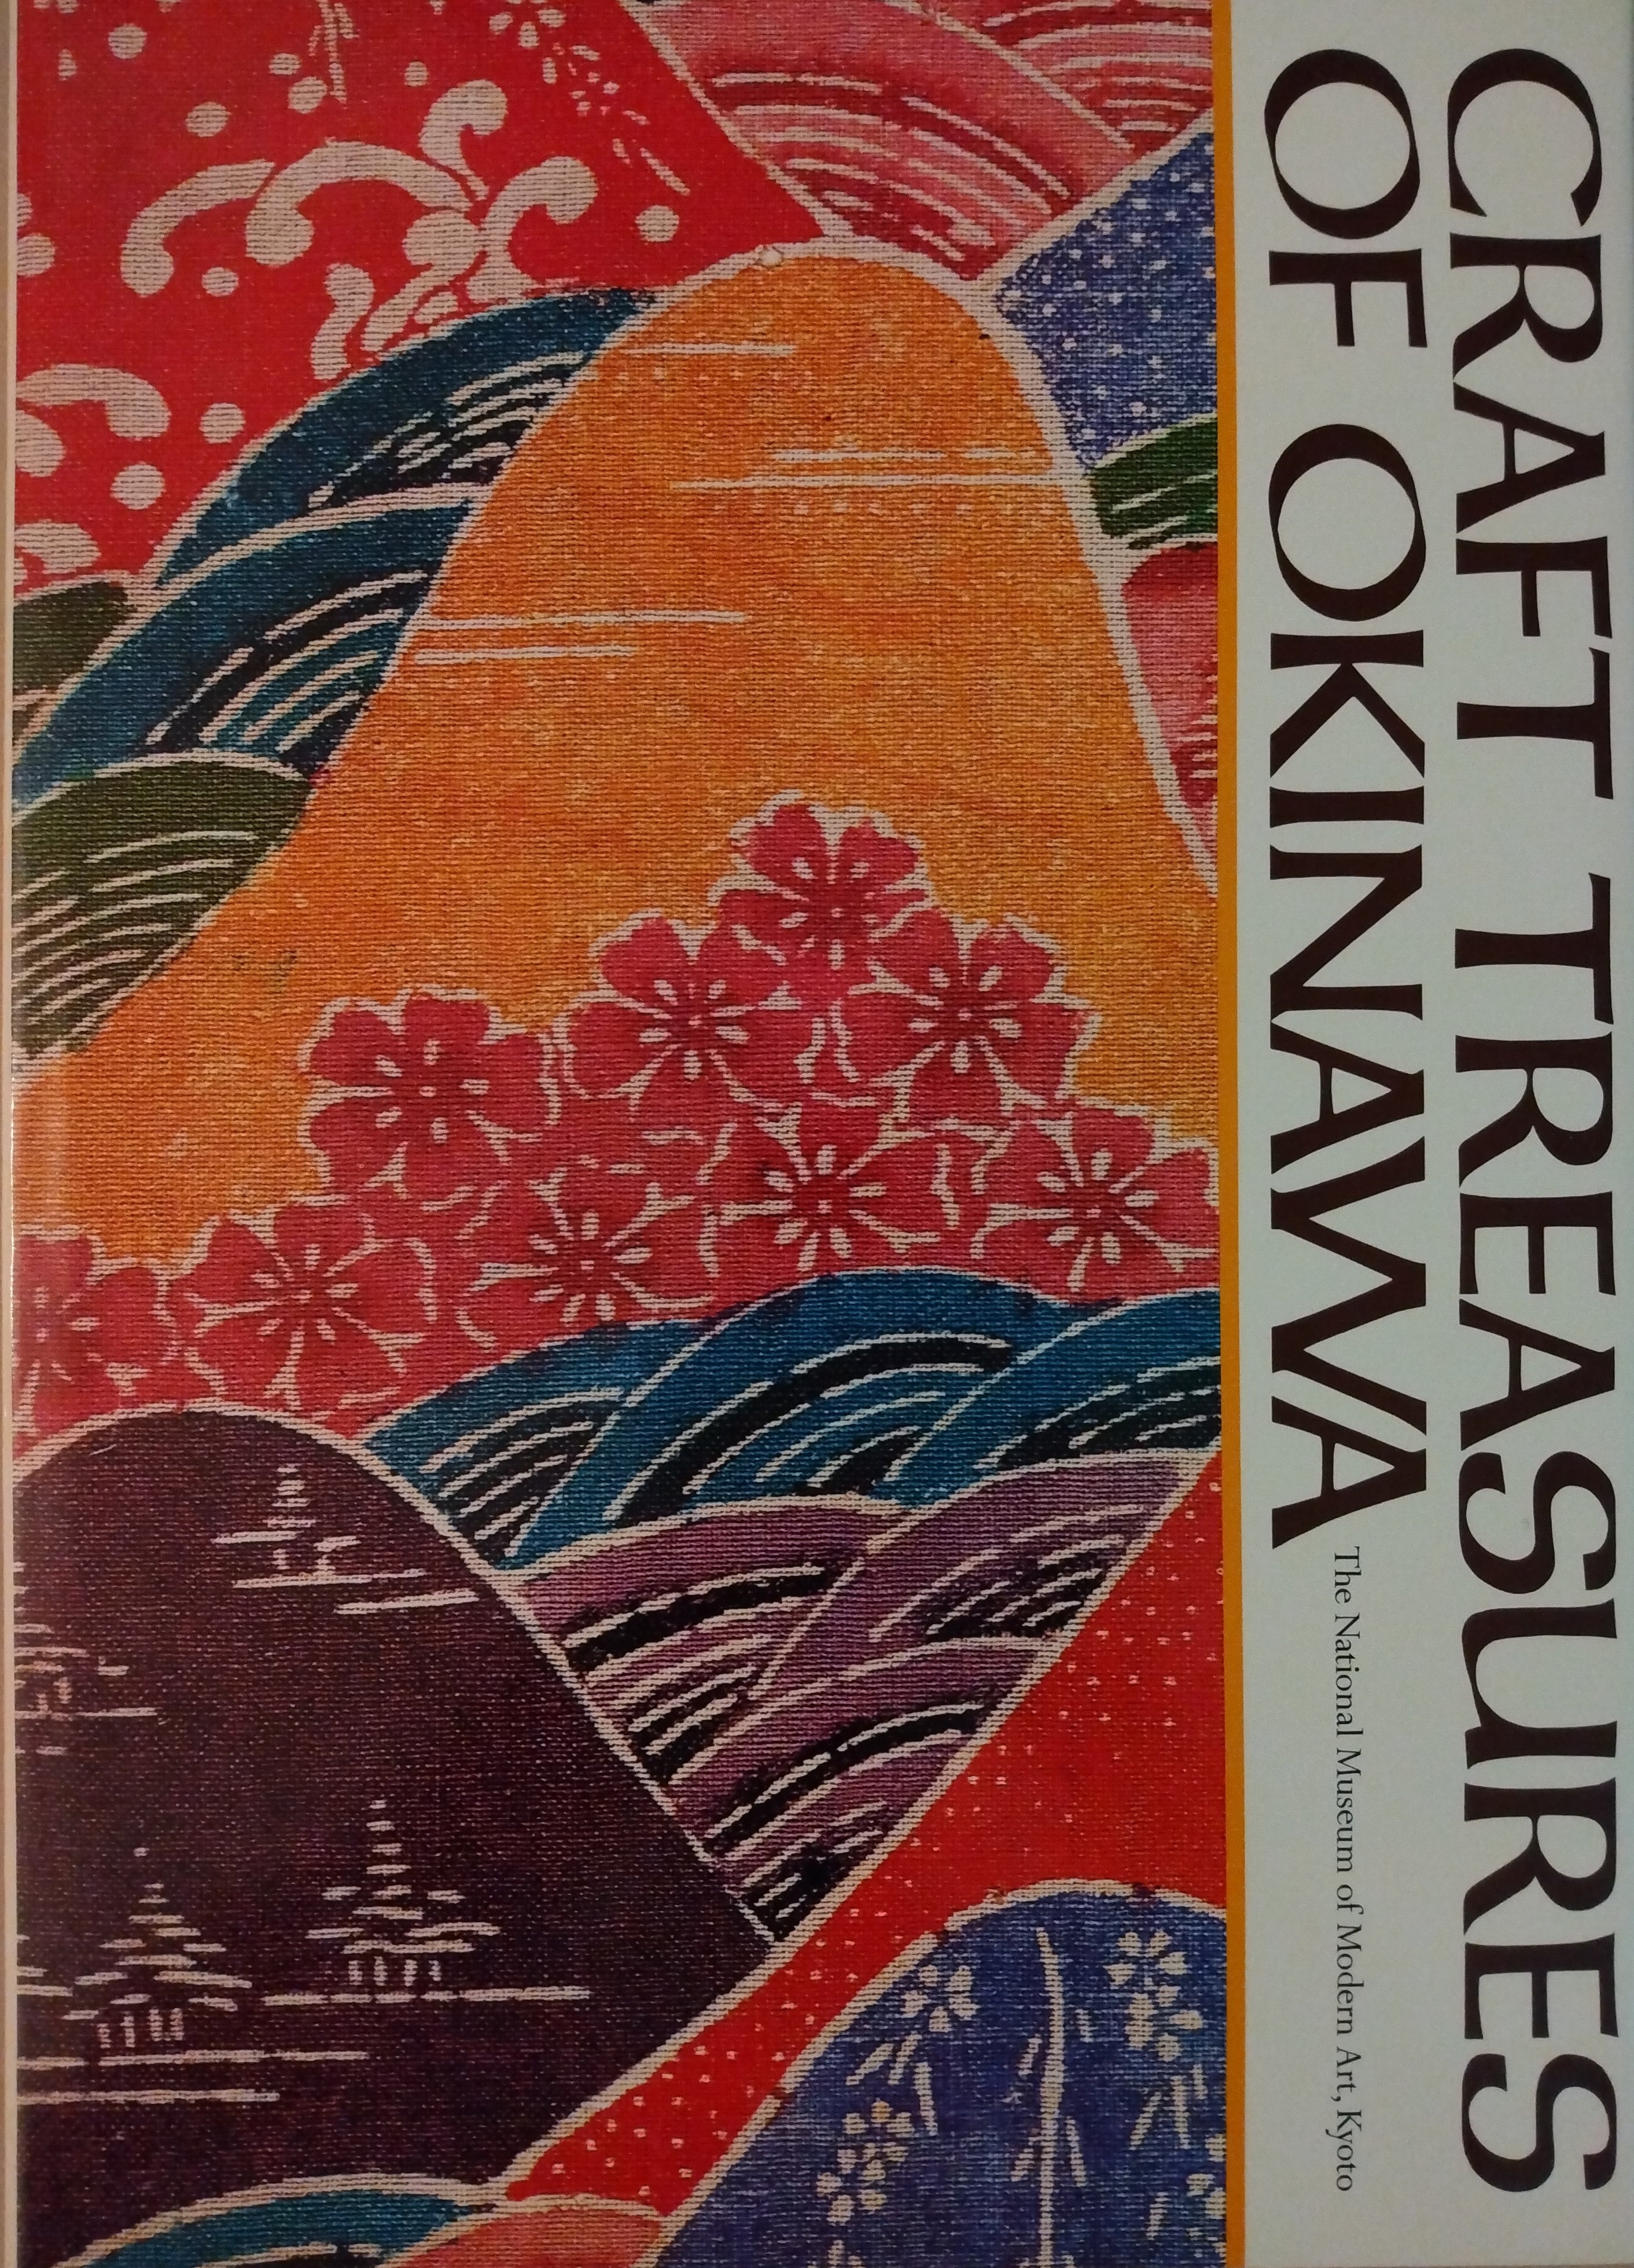 "Craft Treasures of Okinawa", The National Museum of Modern Art, Kyoto; Thiel Collection